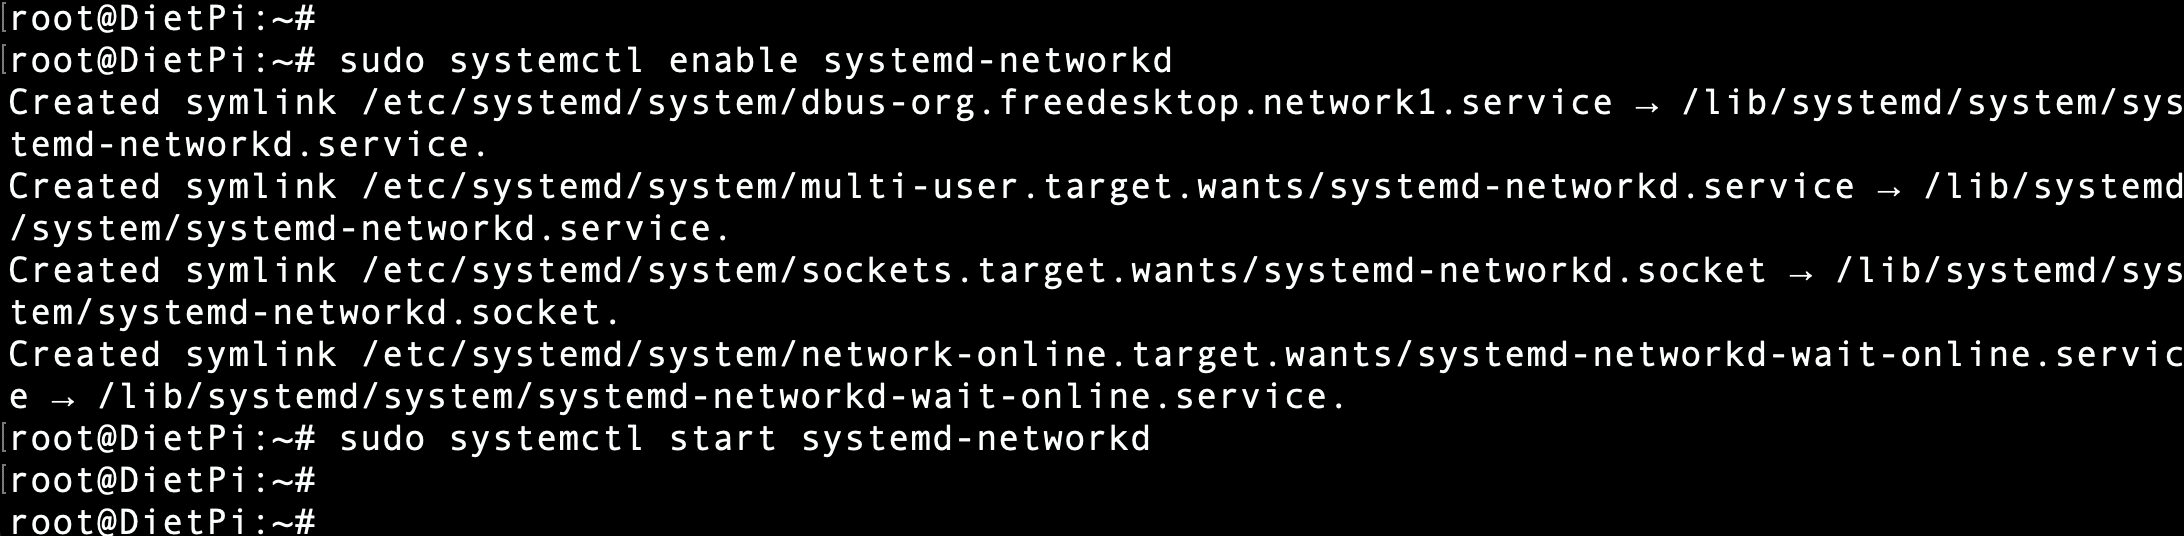 enable systemd networkd